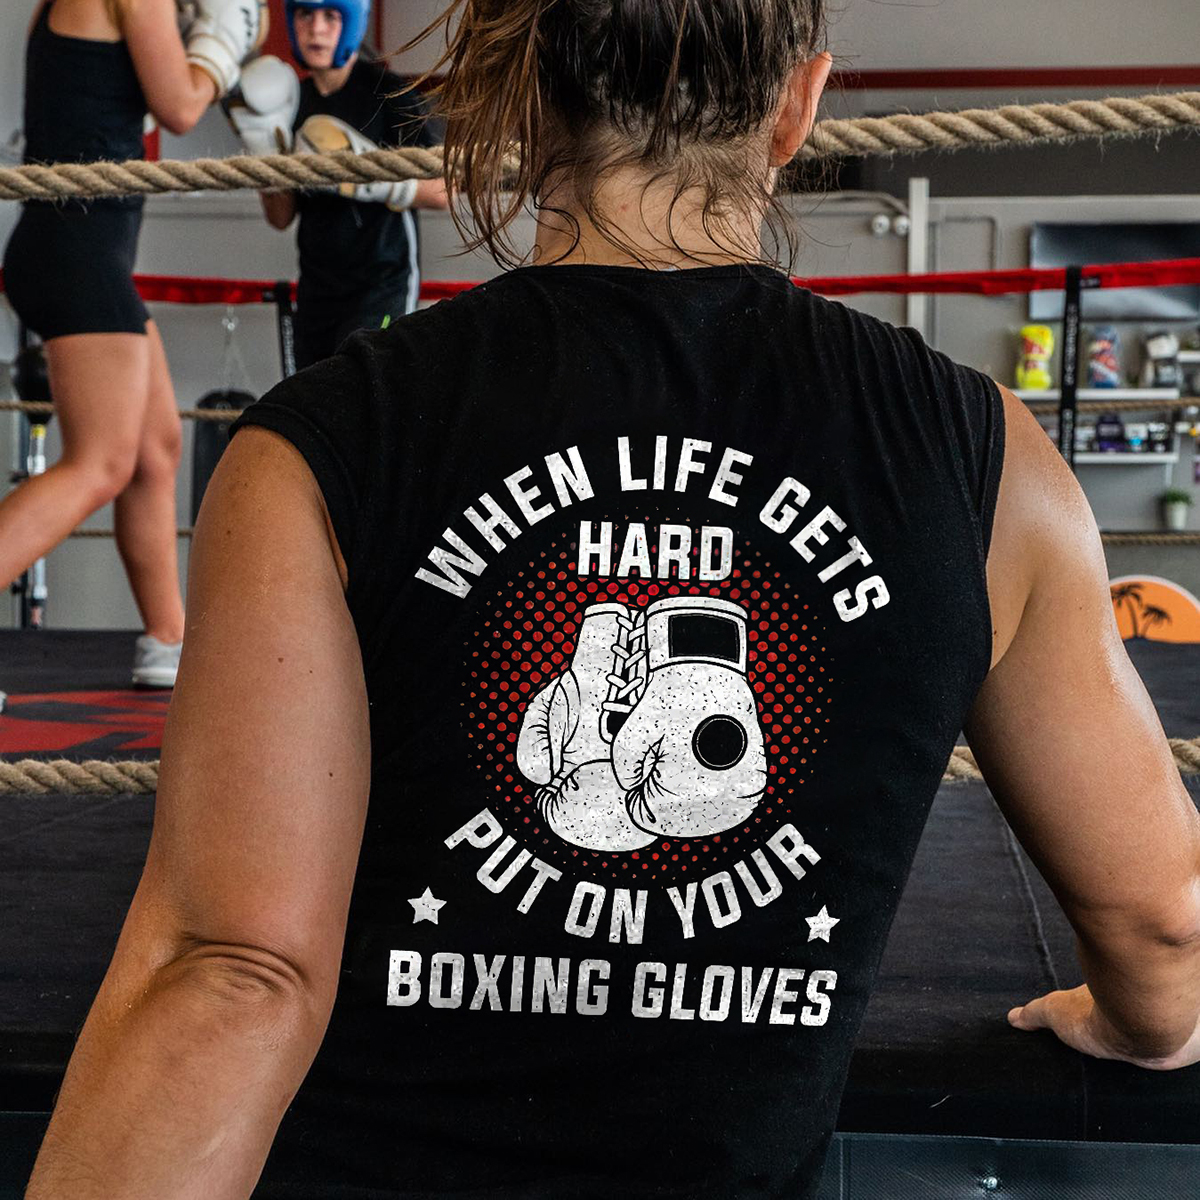 When Life Gets Hard Put On Your Boxing Gloves Printed Women's Vest